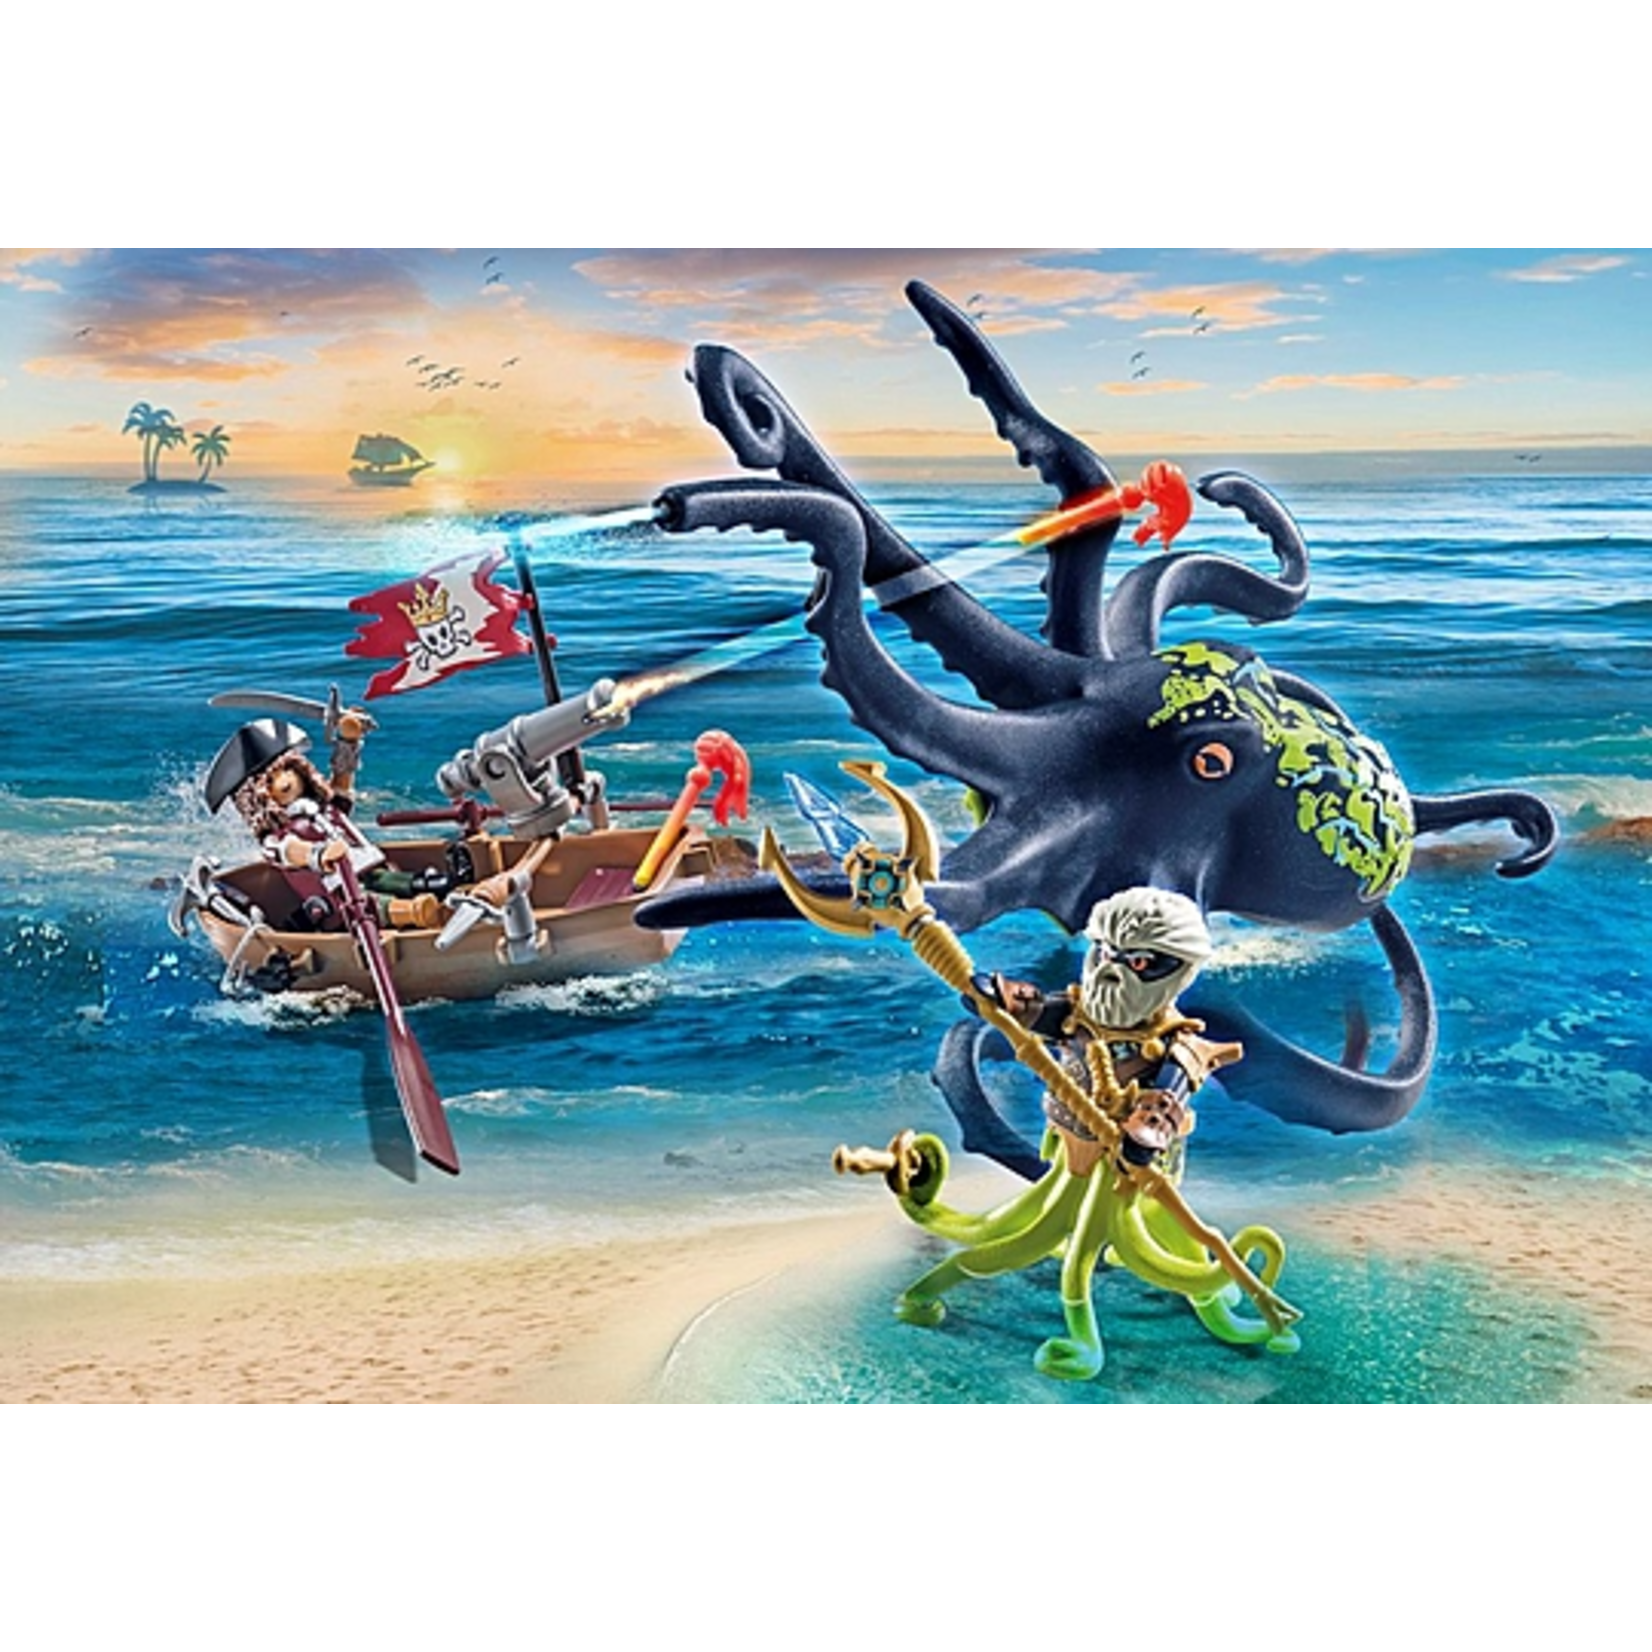 Playmobil Battle with the Giant Octopus - Playmobil 71419